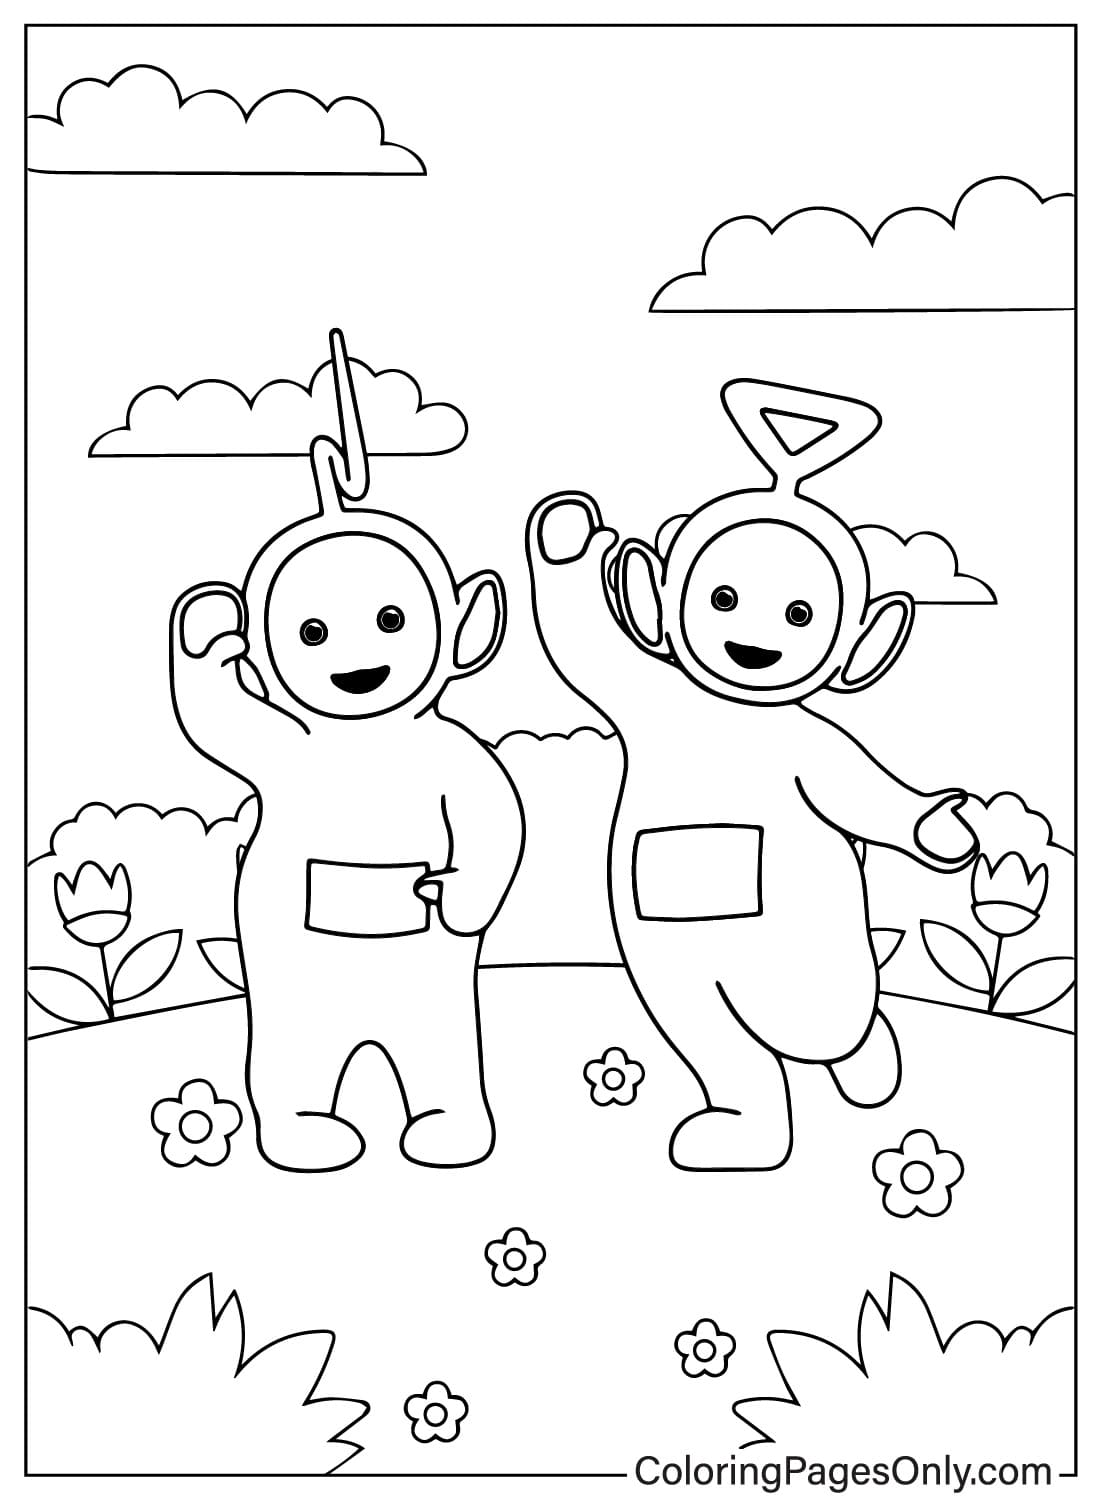 Teletubbies – WildBrain Coloring Page PDF from Teletubbies - WildBrain